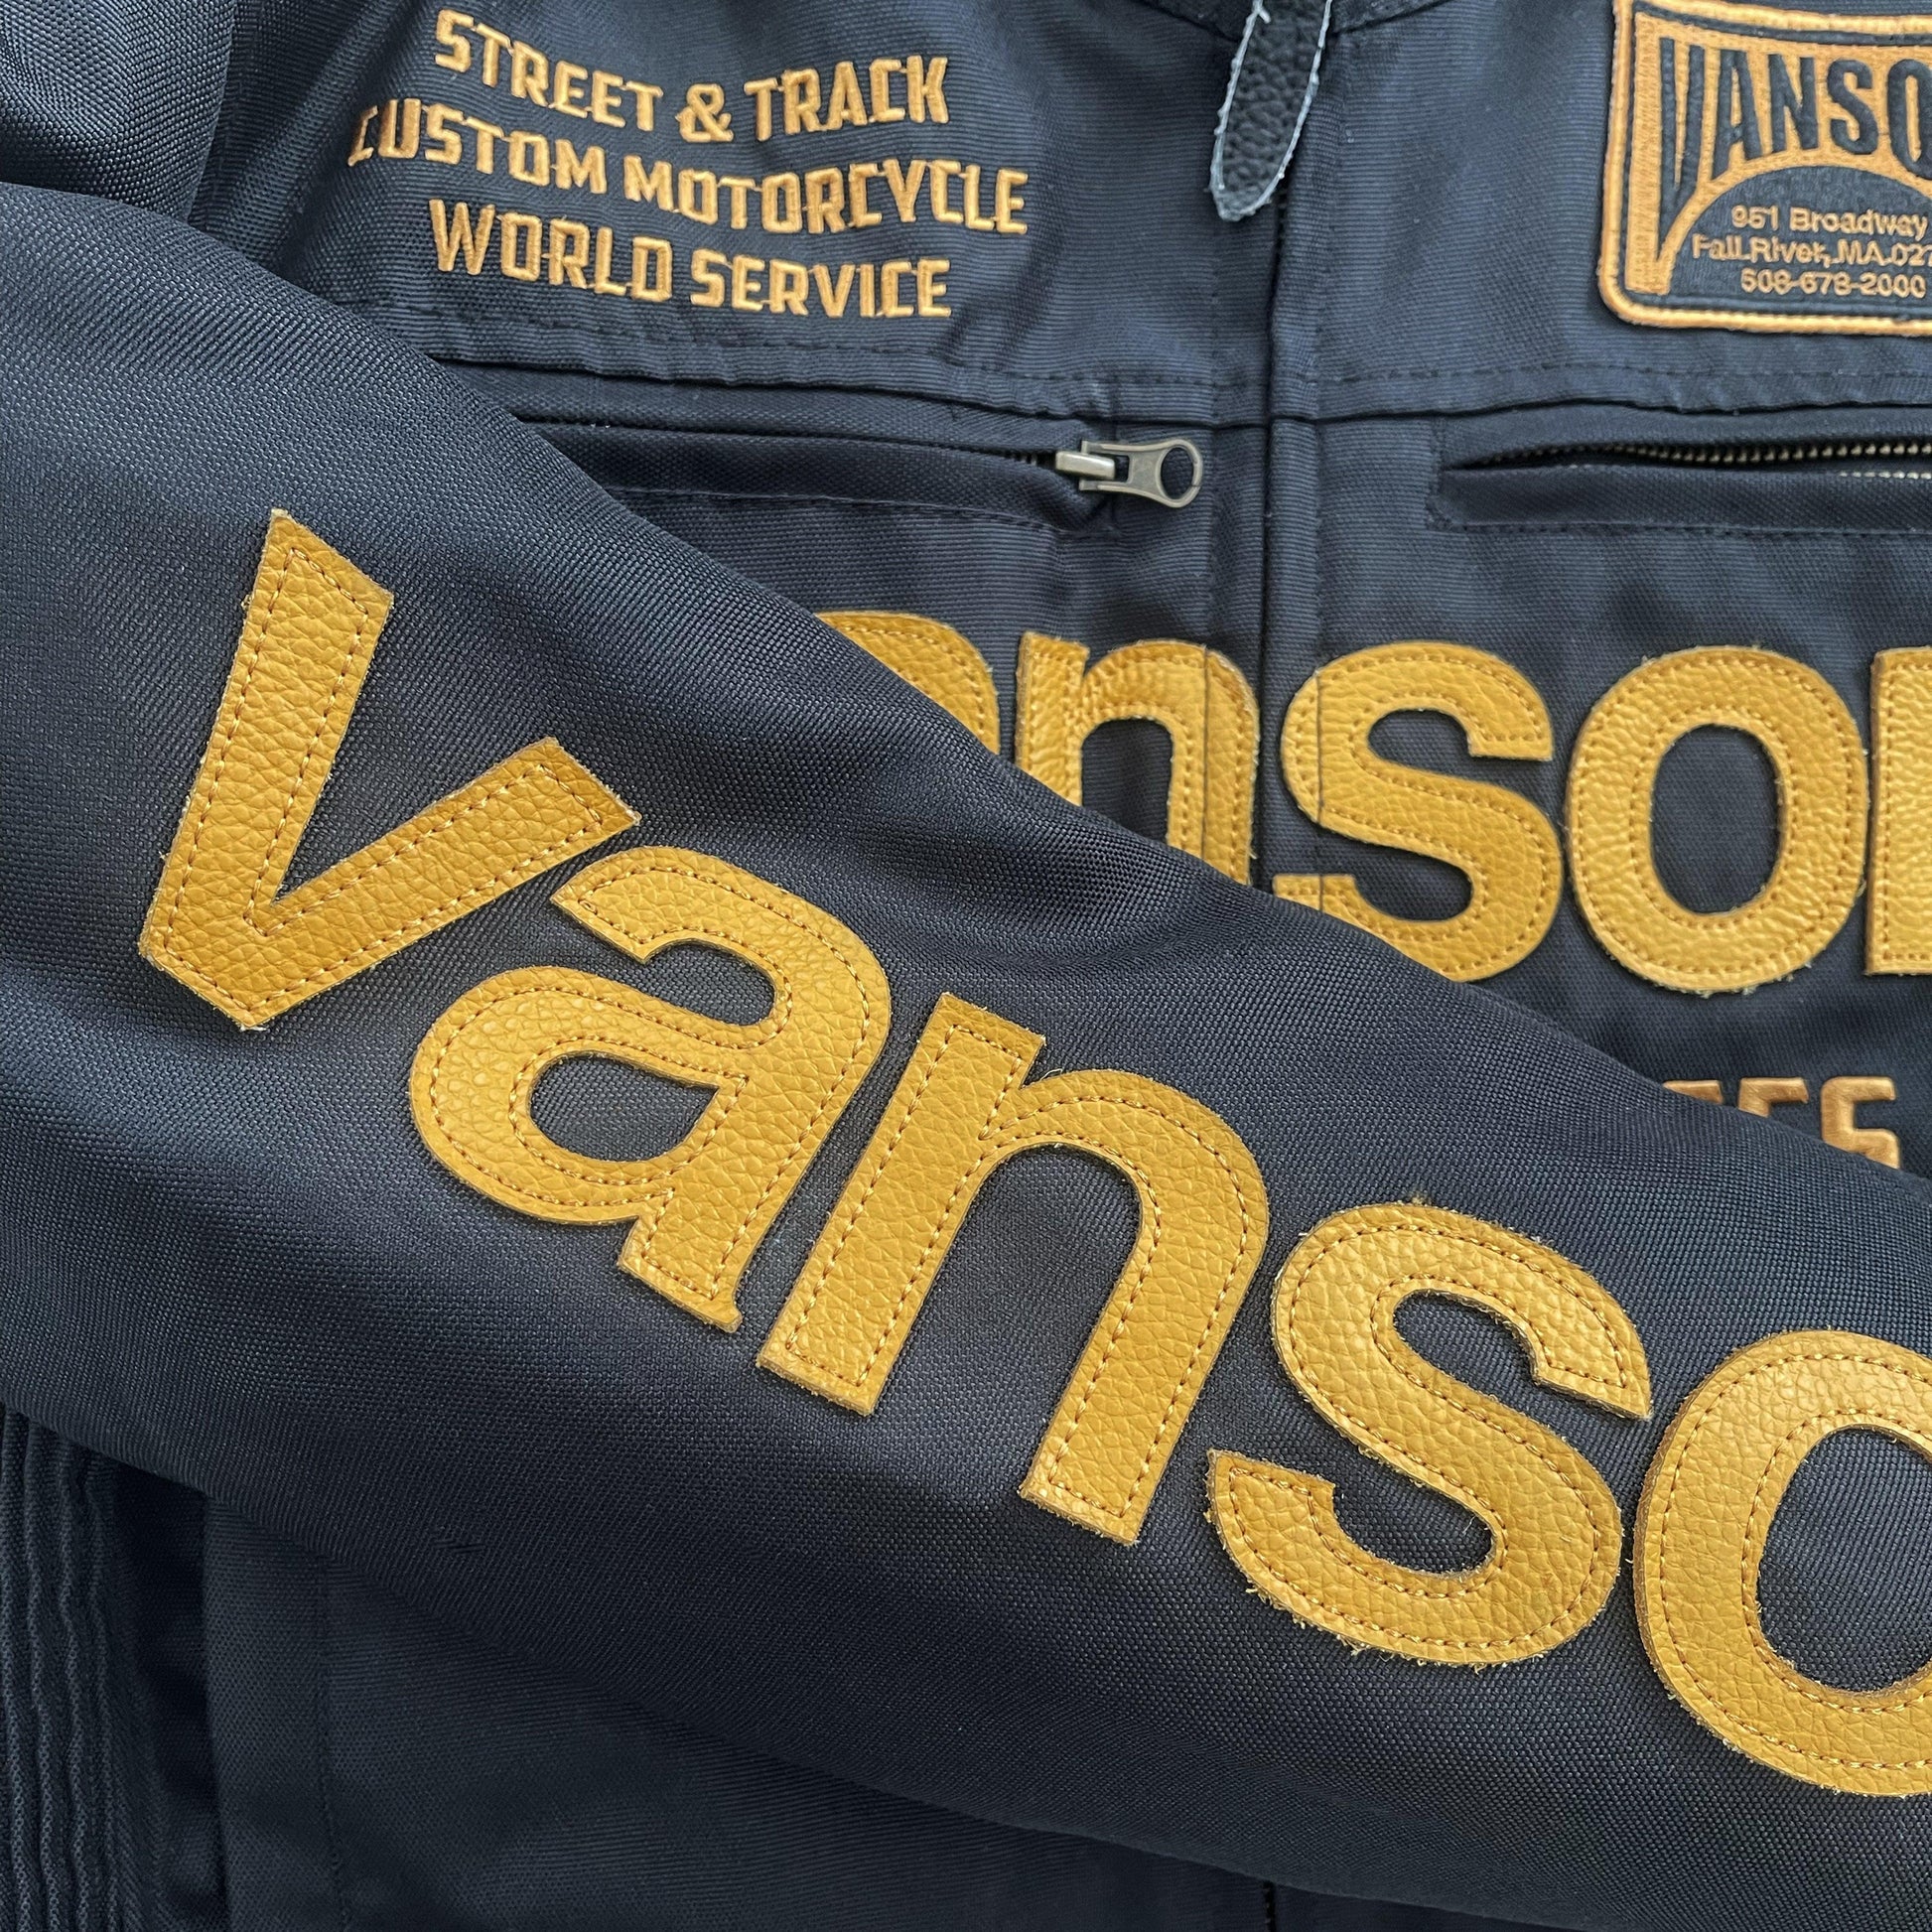 Vanson Leathers Motorcycle Mesh Racer Jacket - Known Source